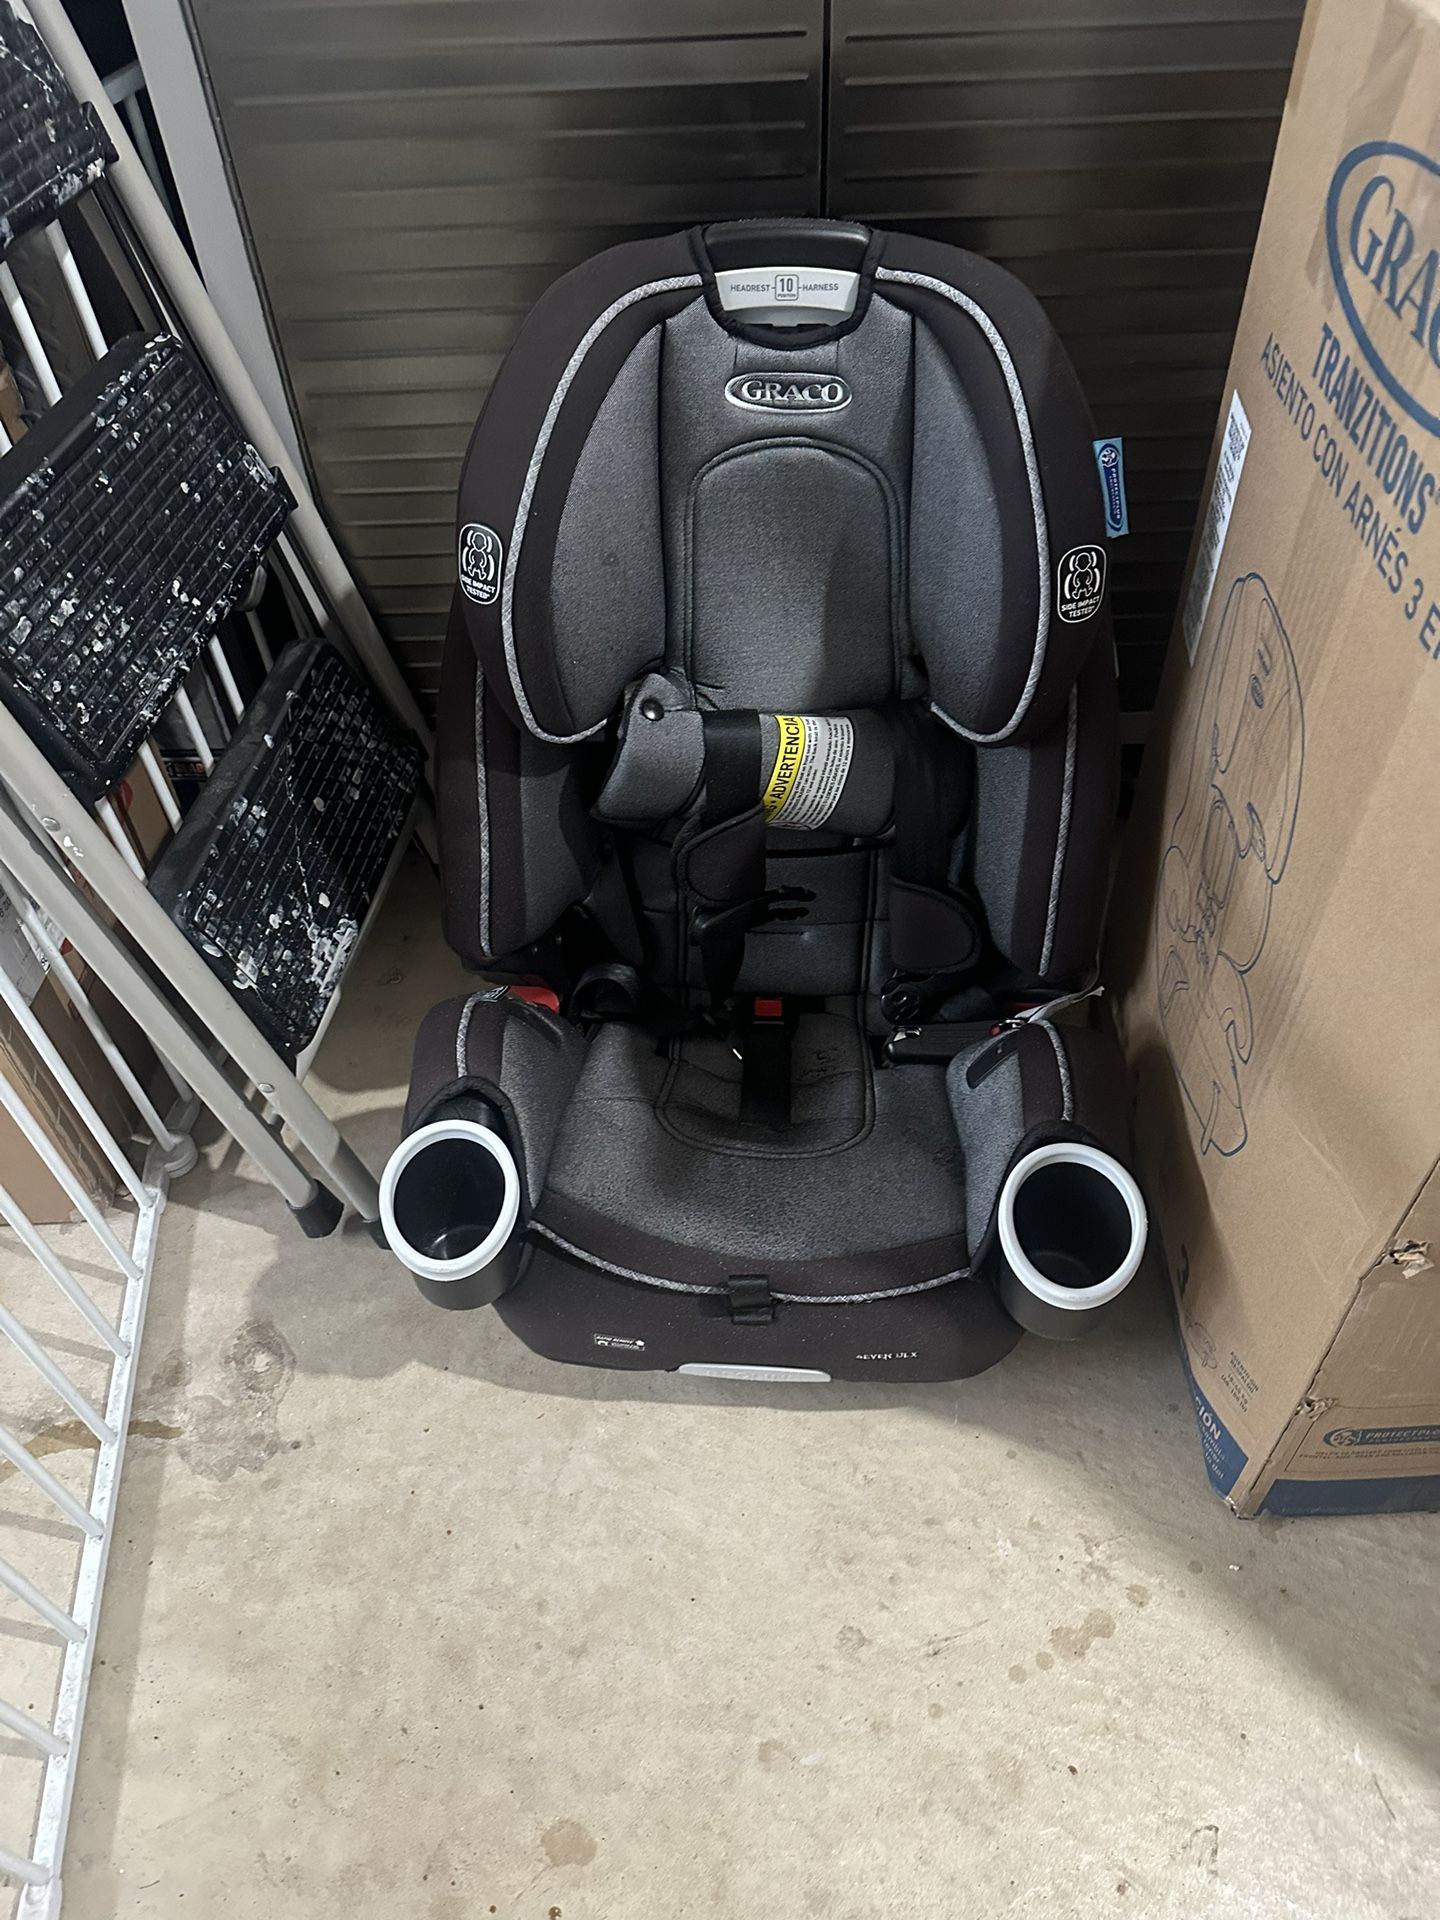 Graco 4ever deluxe infant and kids car seat